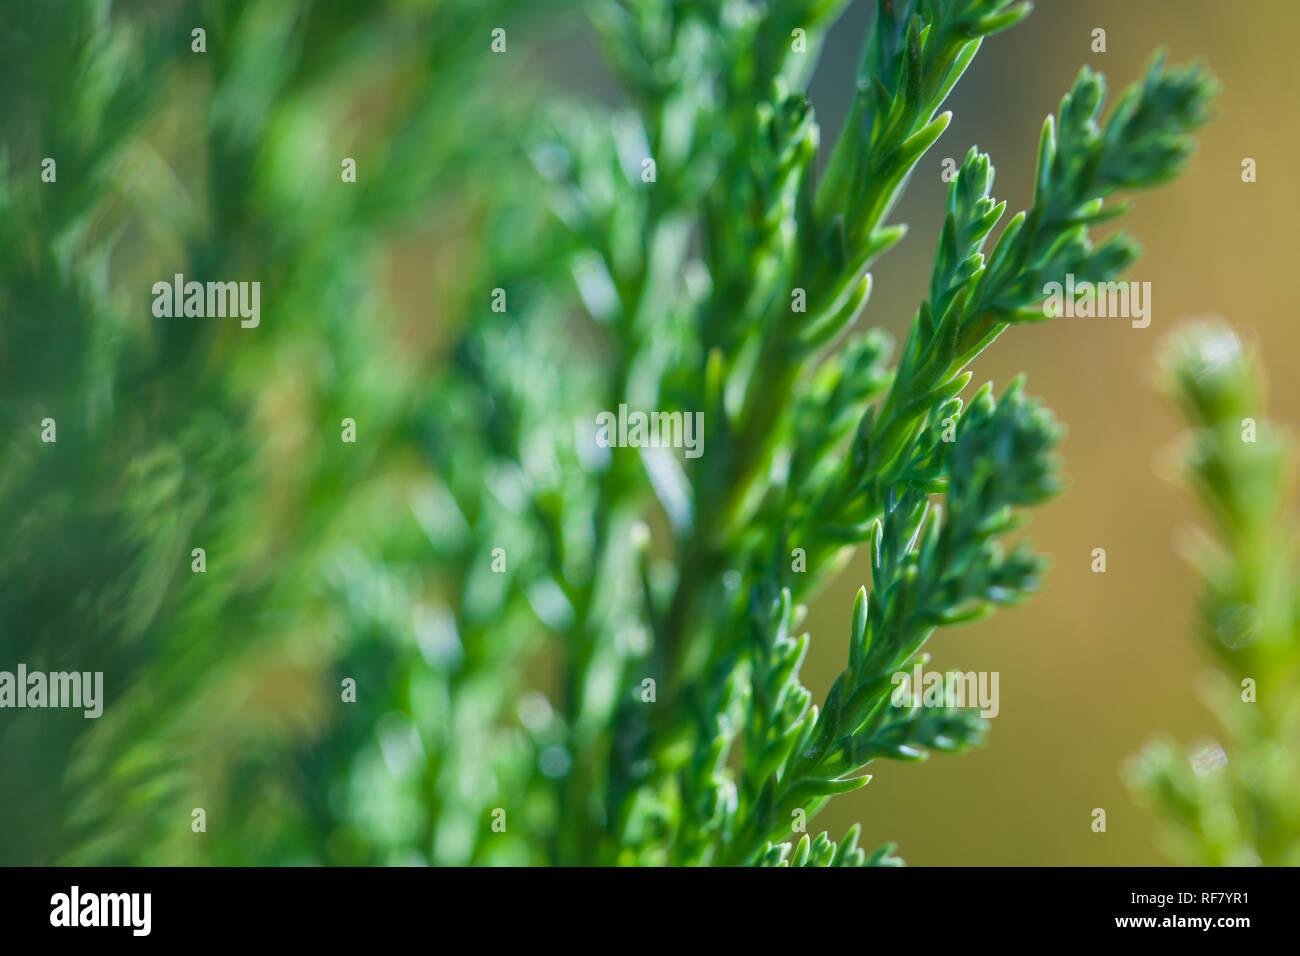 Macro photo of green branches of Juniper evergreen shrub plant with brown background Stock Photo